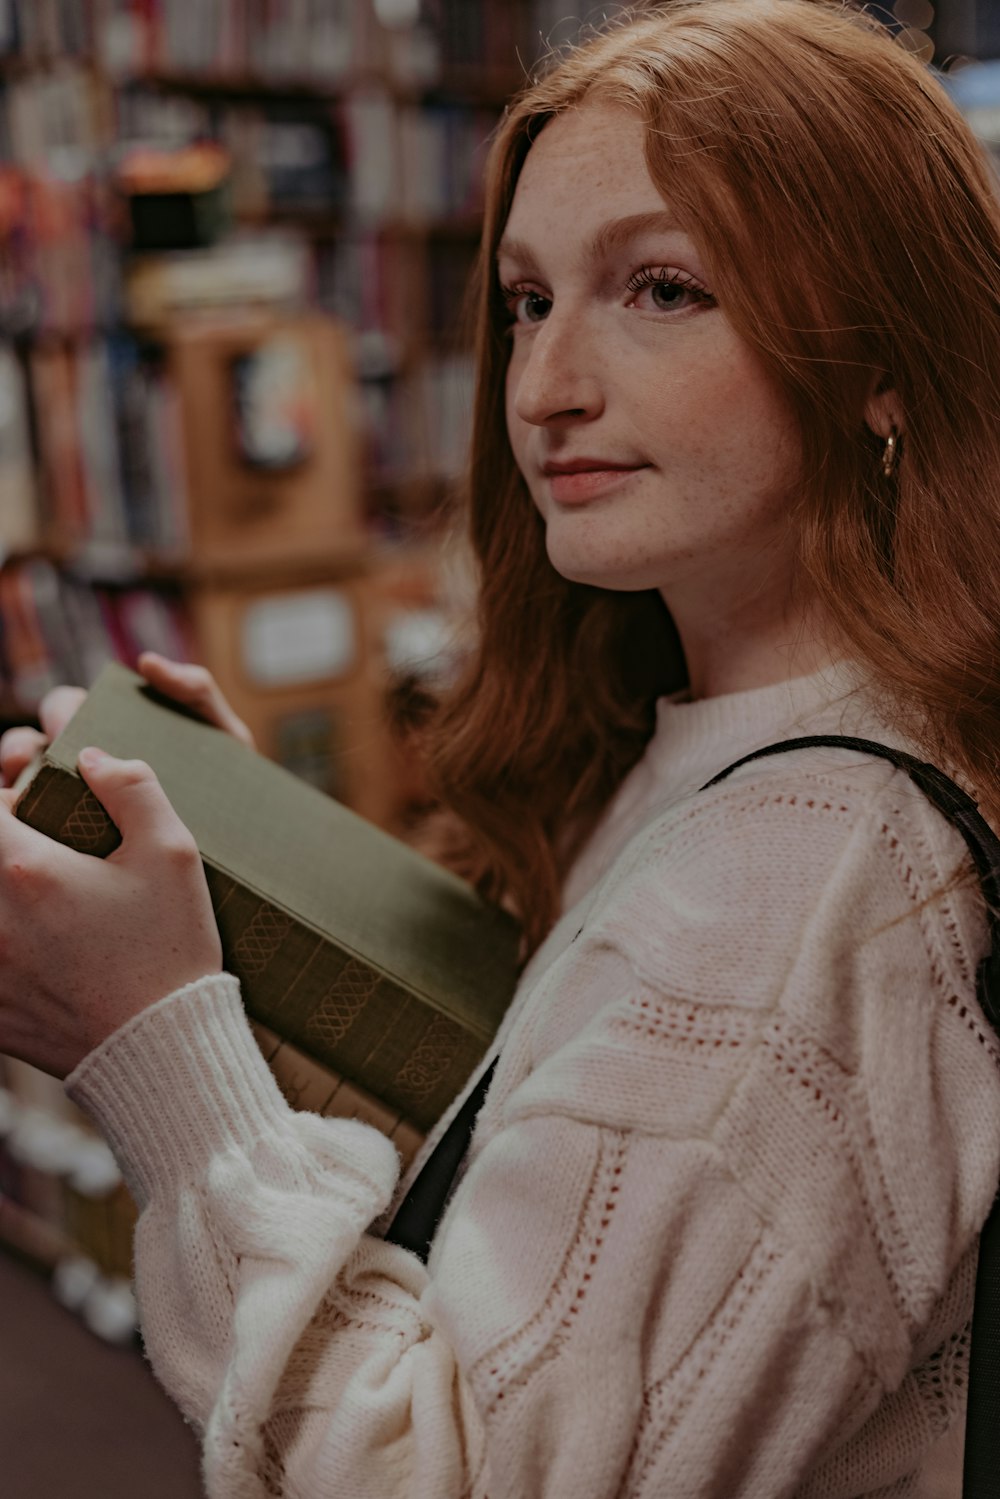 a woman holding a book in a library